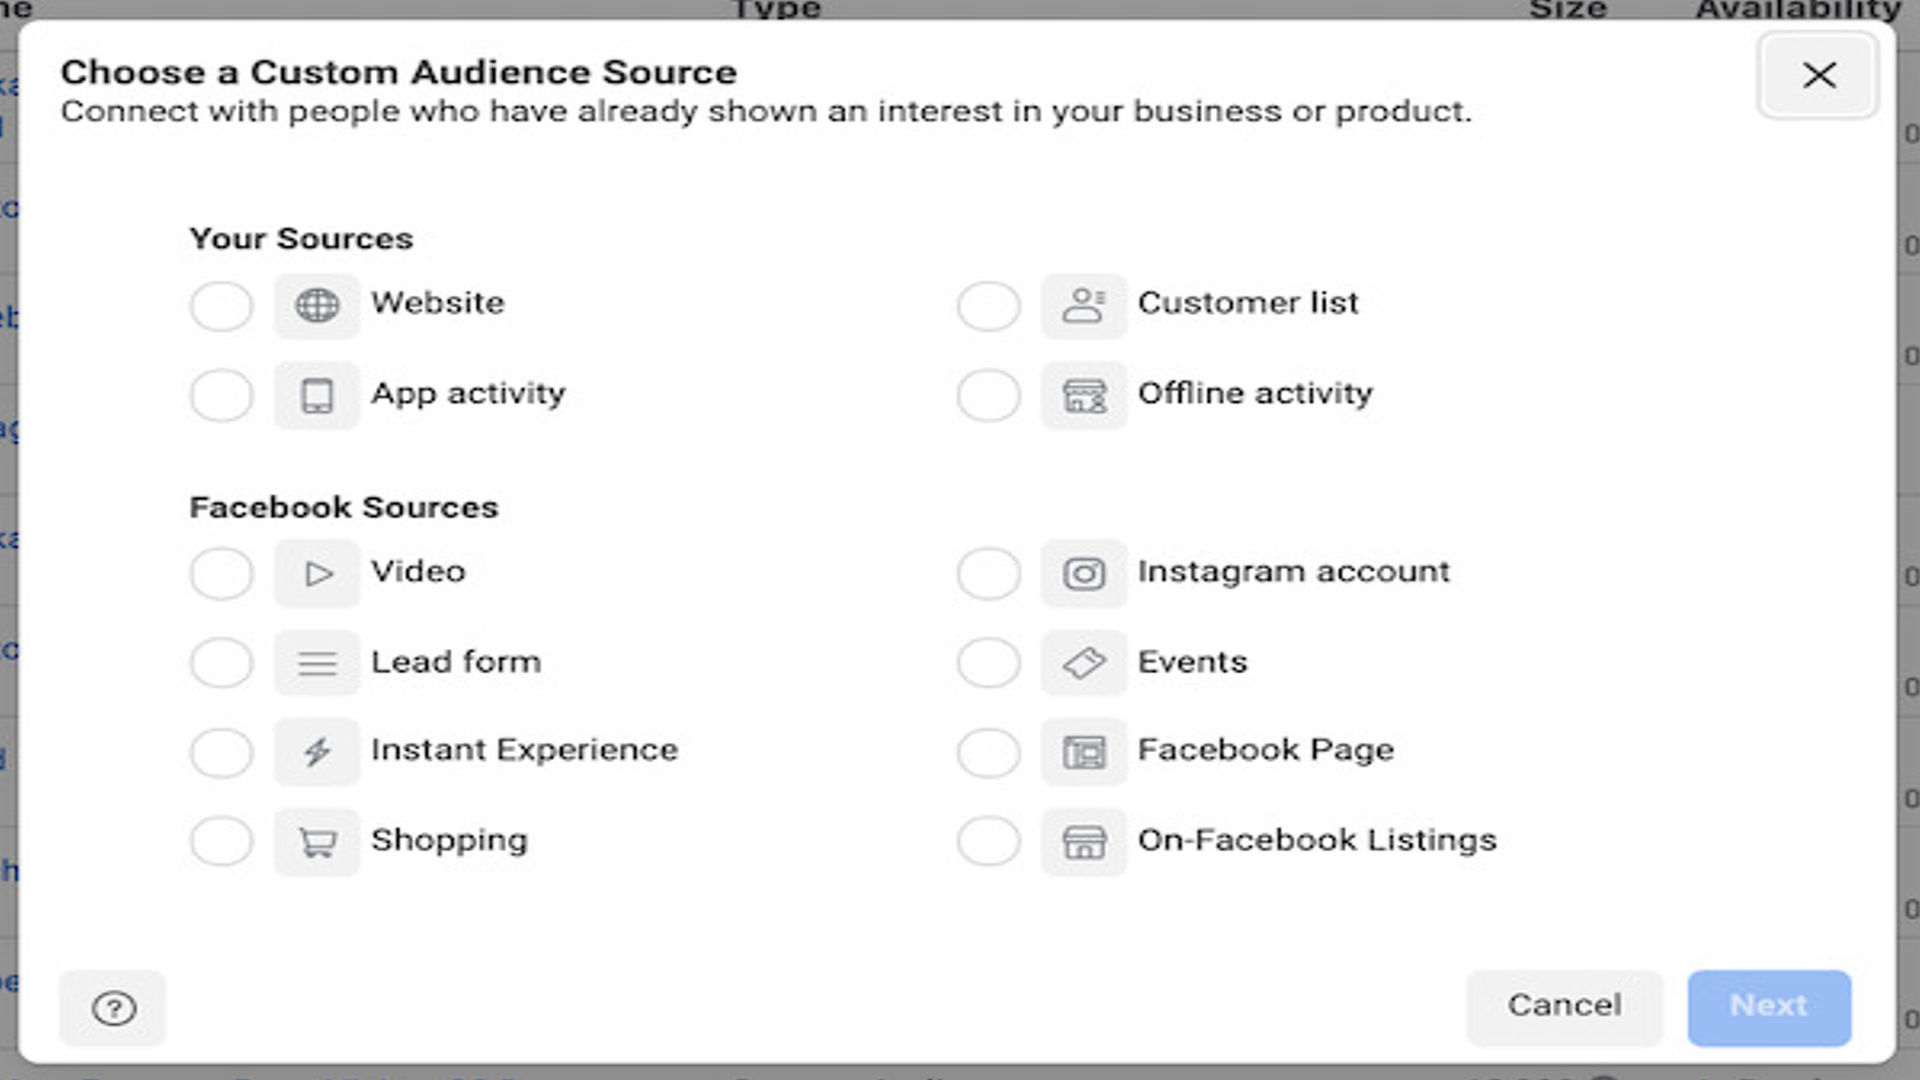 A image shows the custom audience section in Facebook ads manager.